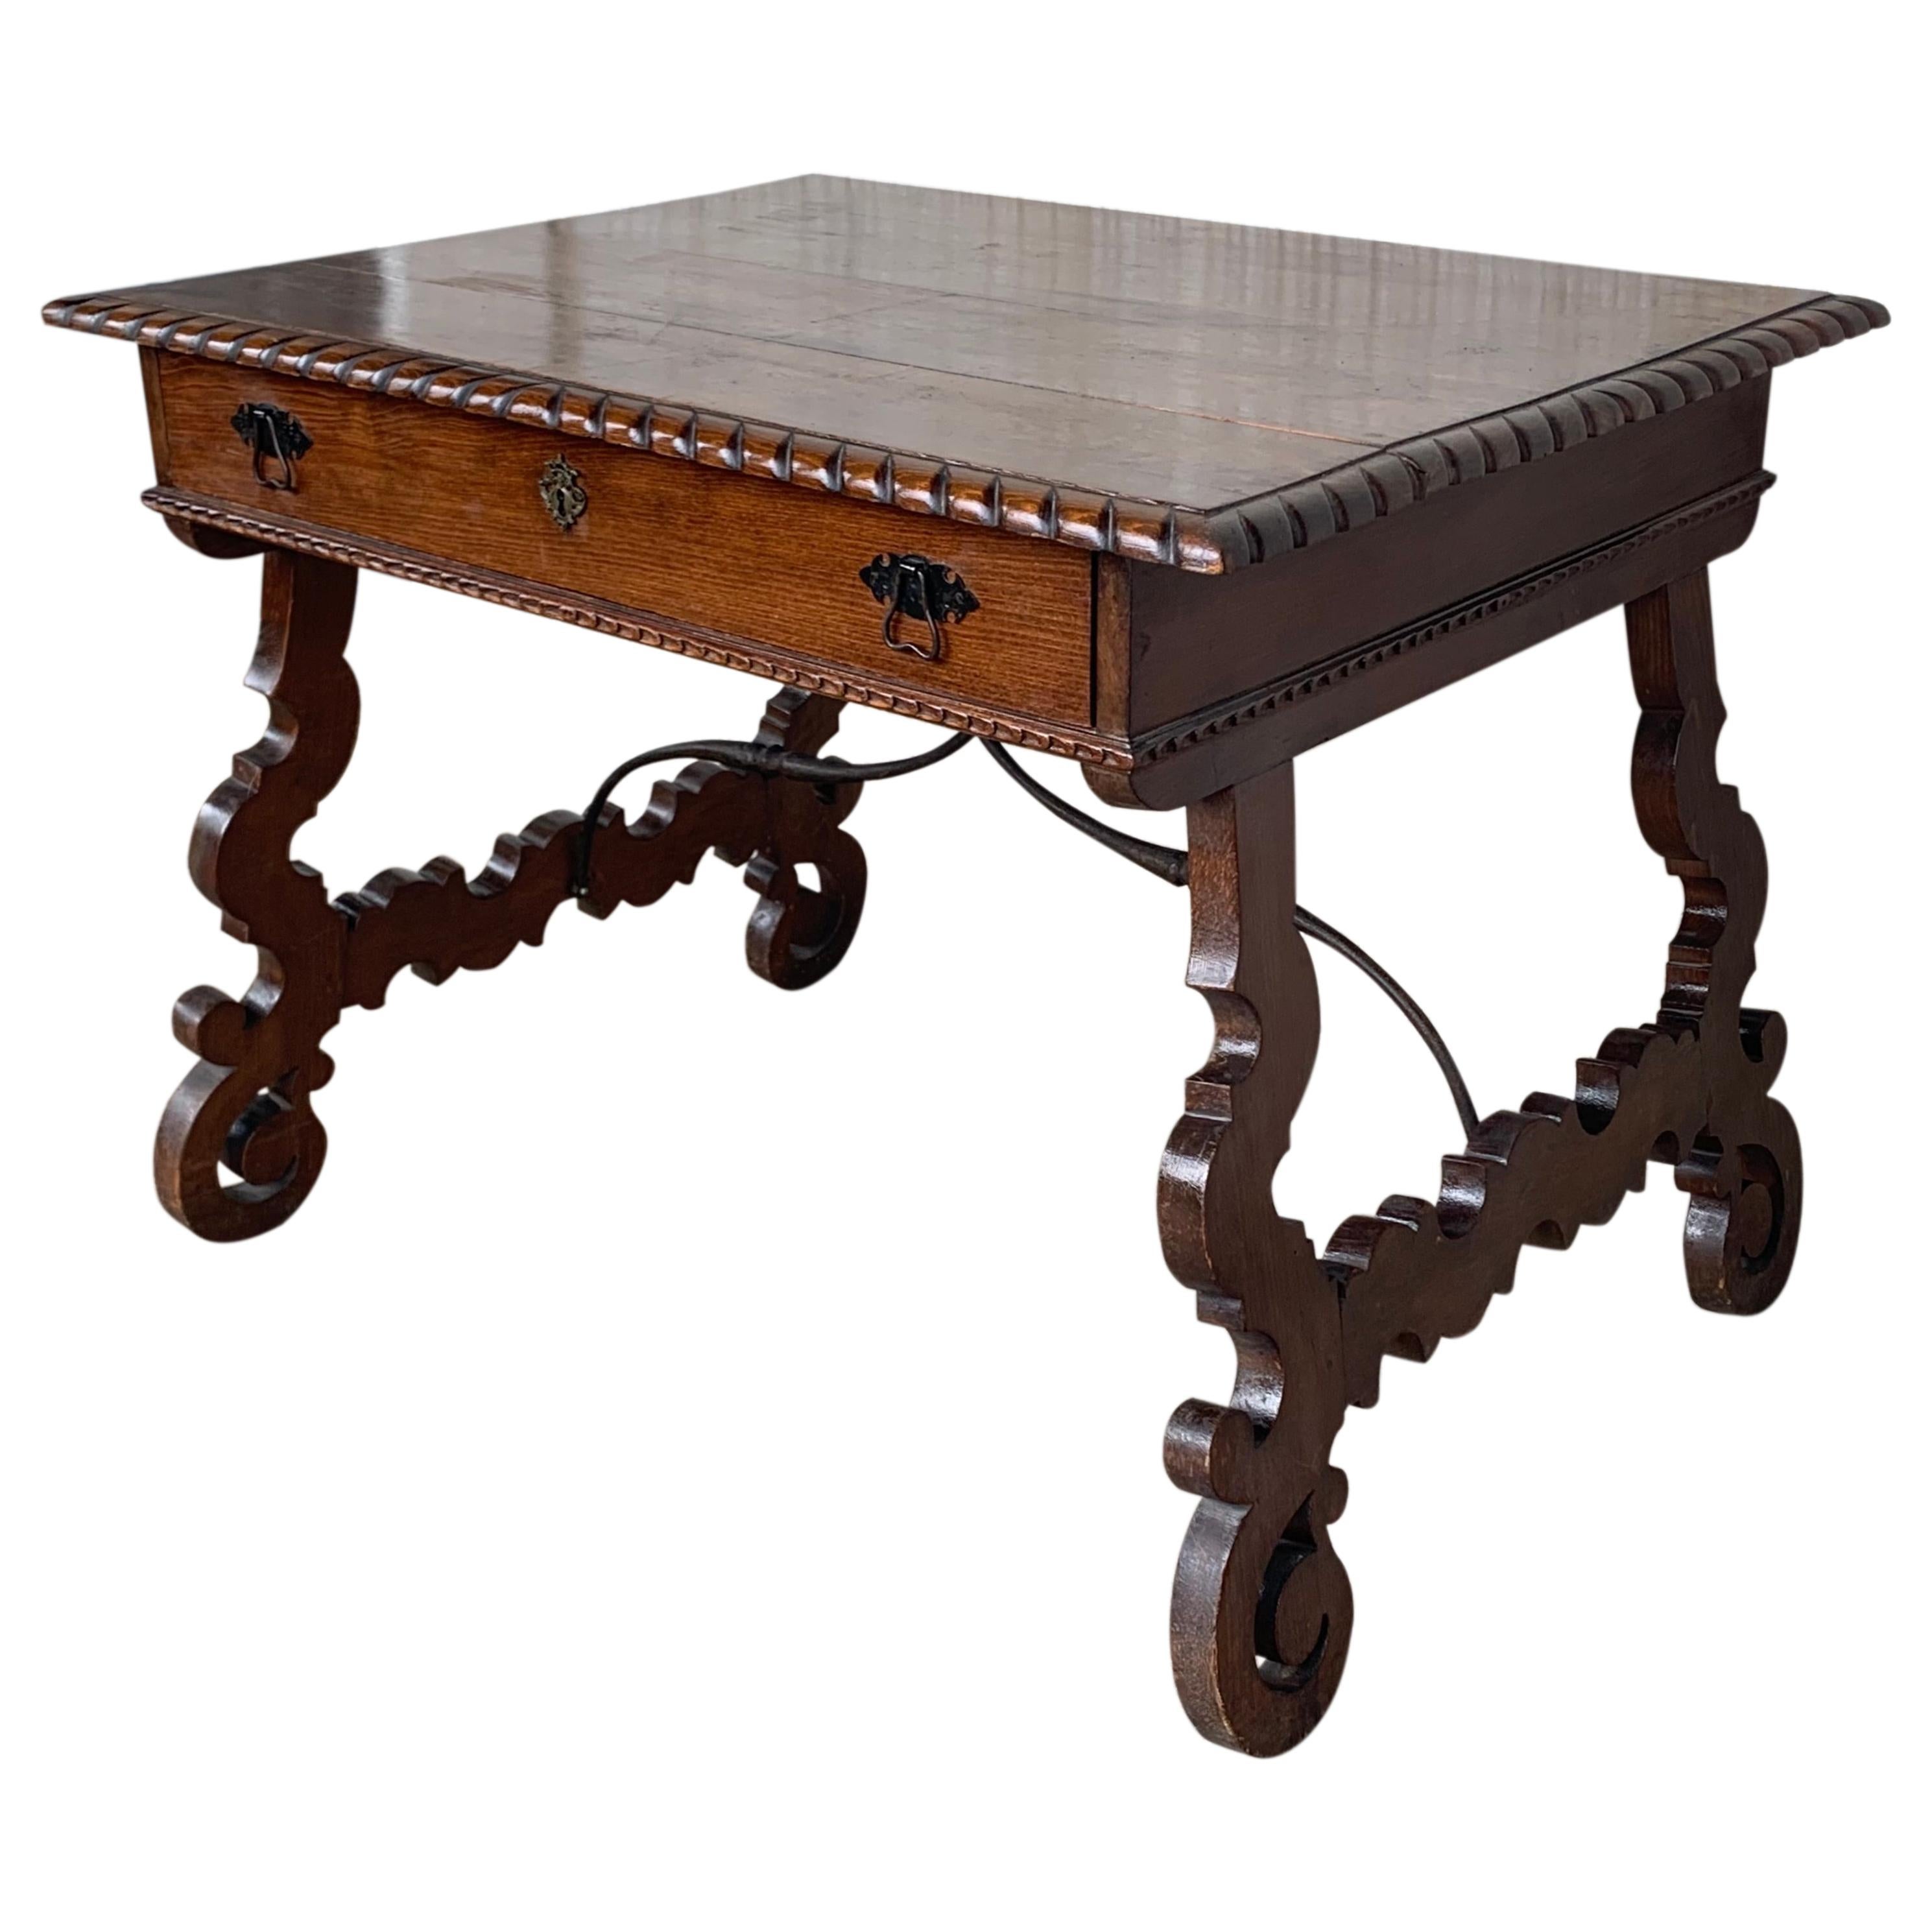 Early 20th Spanish Desk with Lyre Legs and Carved Edges on Top